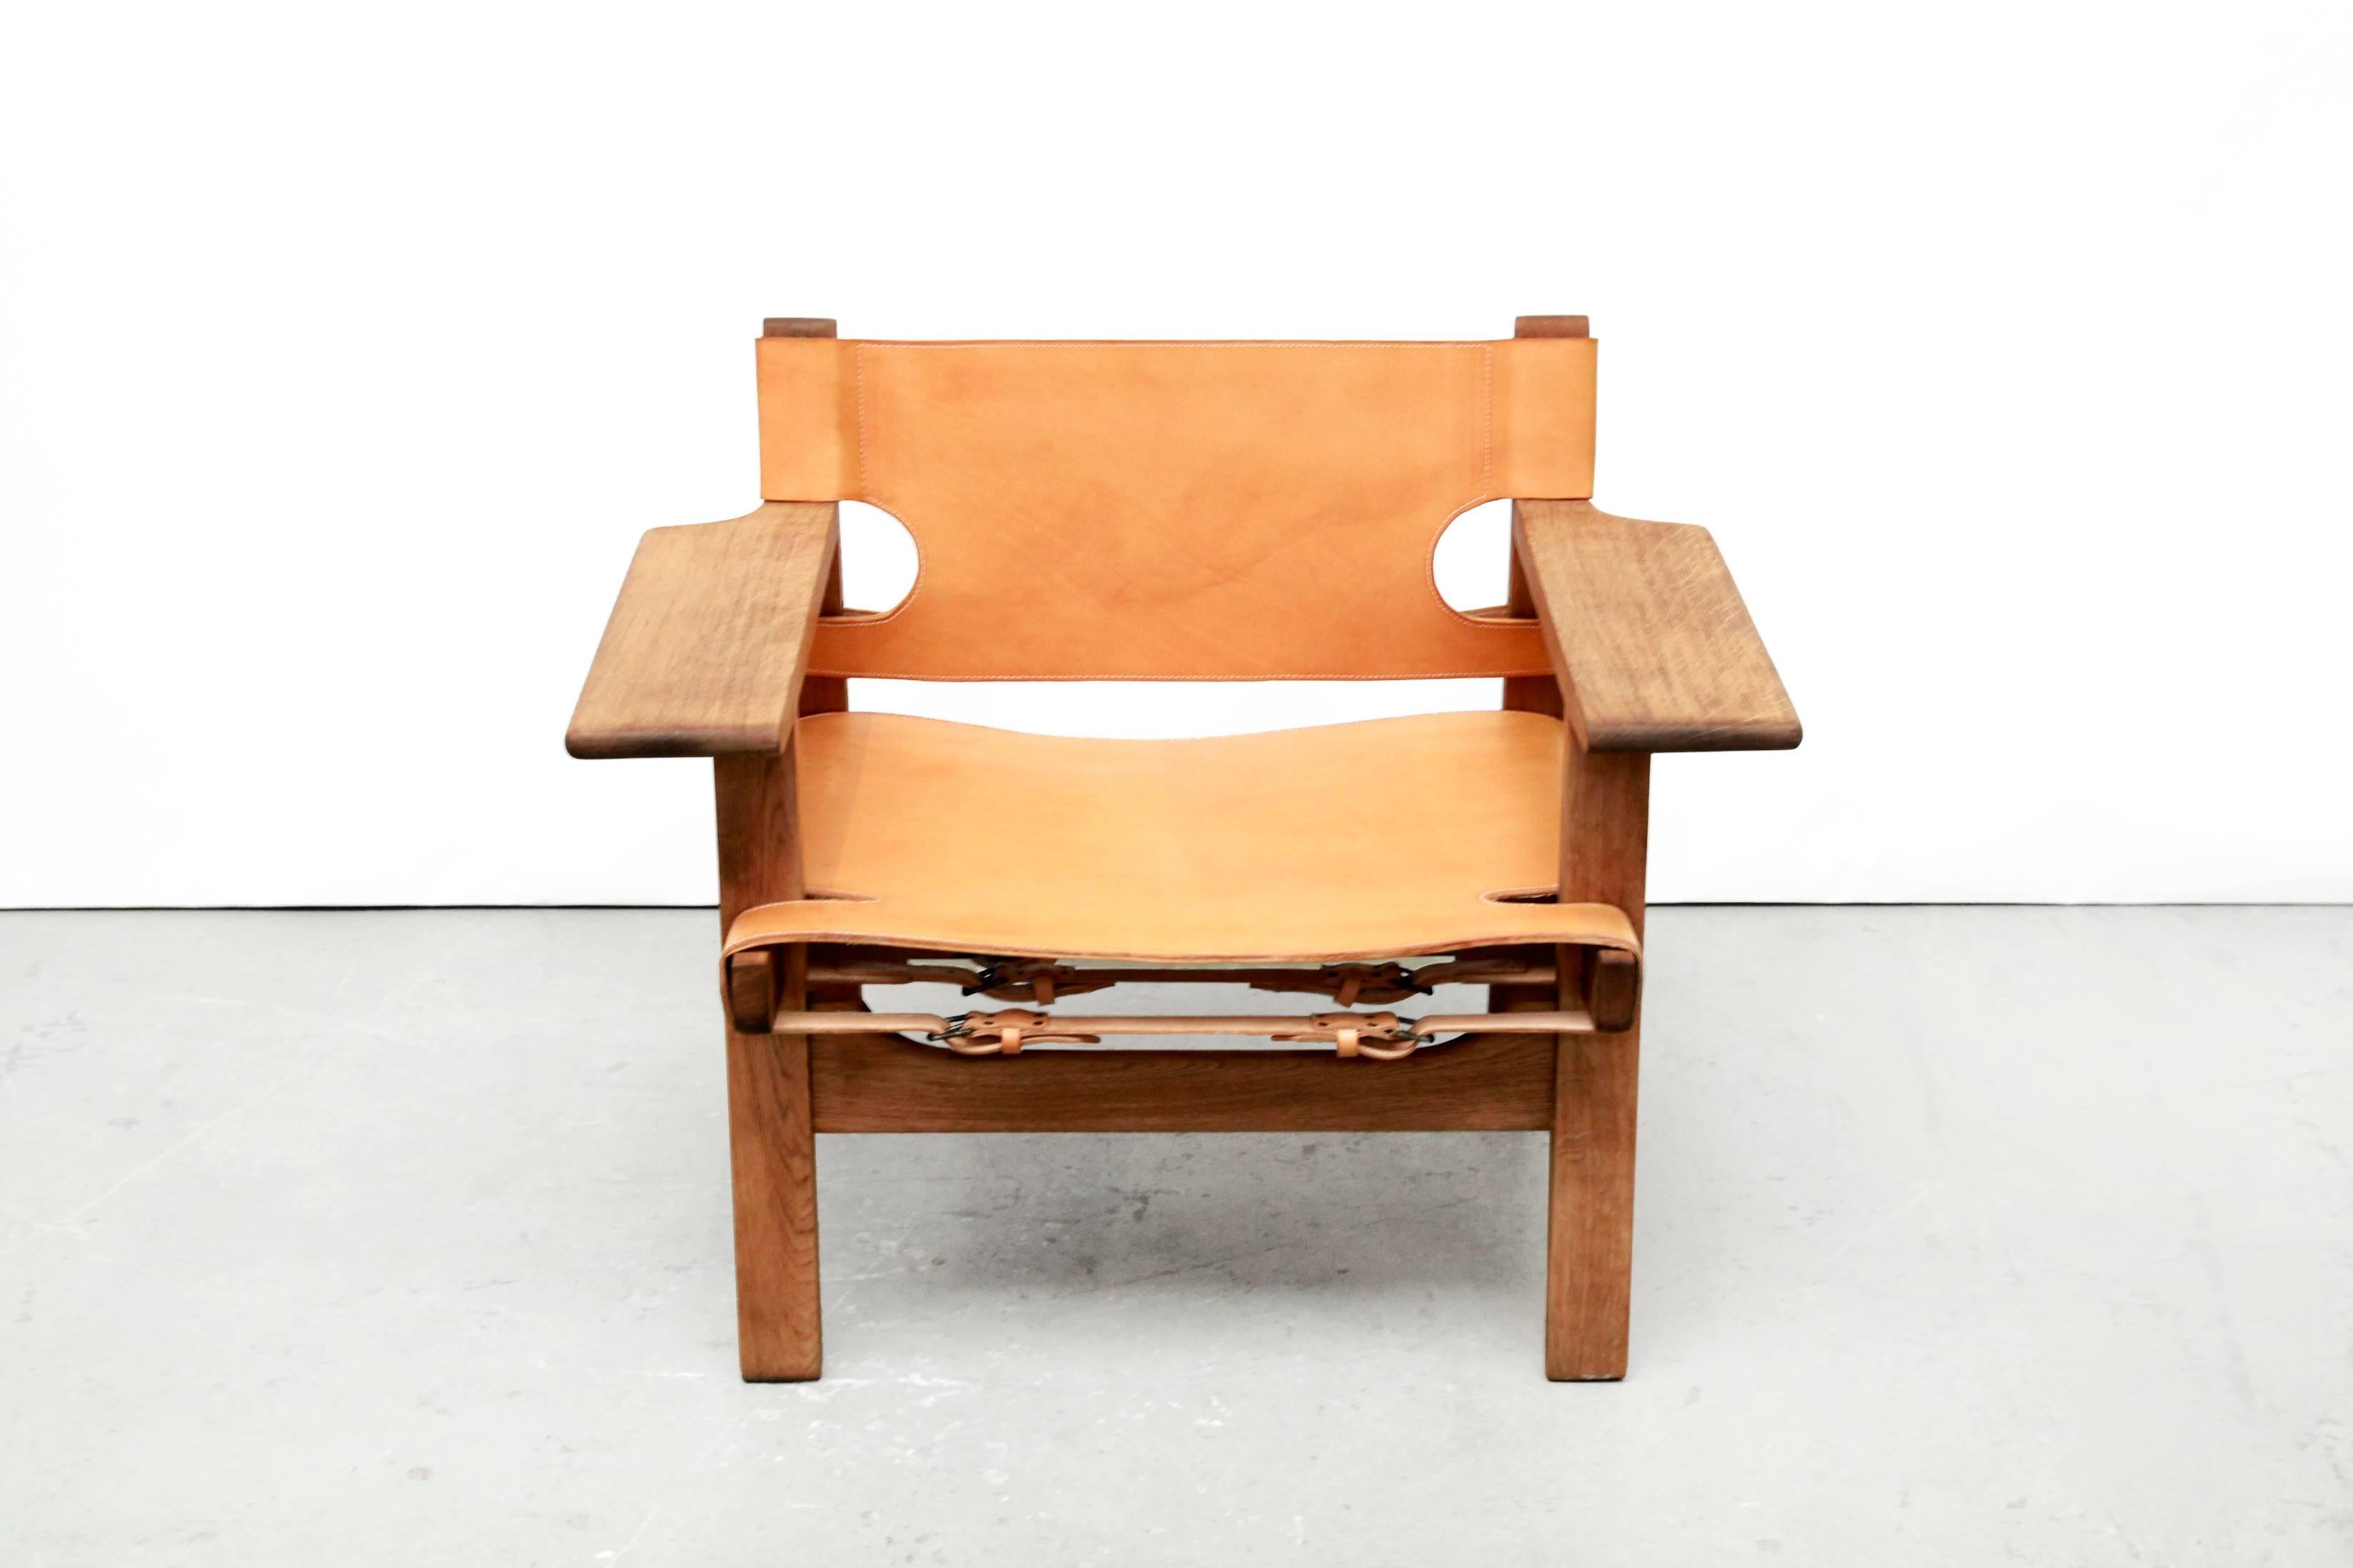 Beautiful early edition of the 'Spanish Chair' designed by Børge Mogensen manufactured by Fredericia furniture, Denmark, circa 1950s.
This chair in solid oak and cognac leather is a well-known iconic piece with a very strong appearance.
The old